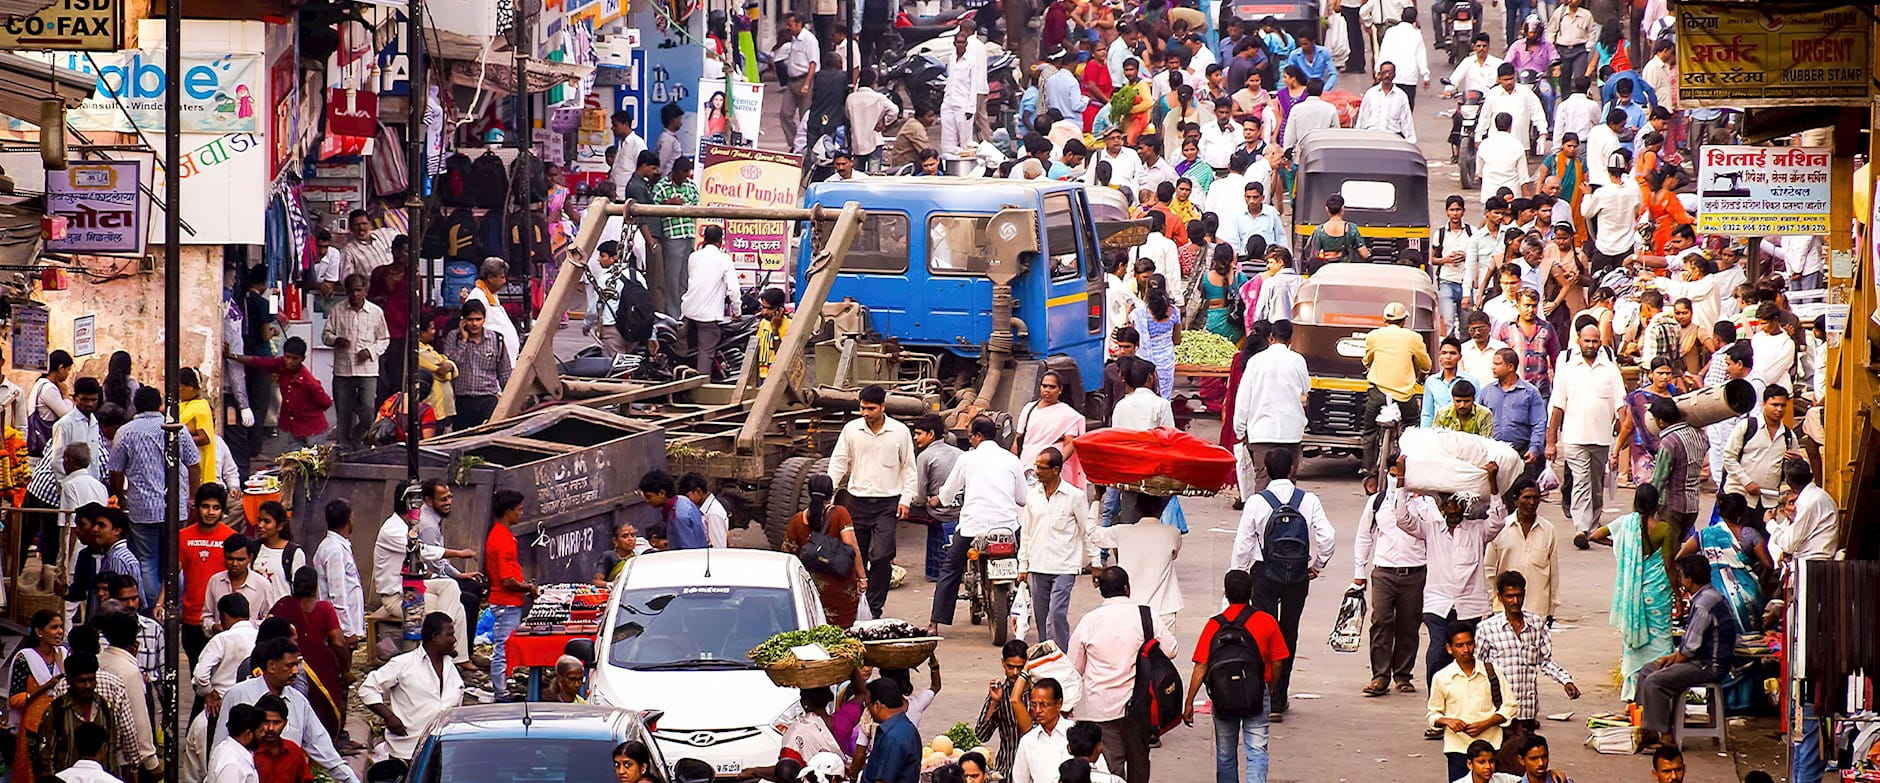 Crowded street in India